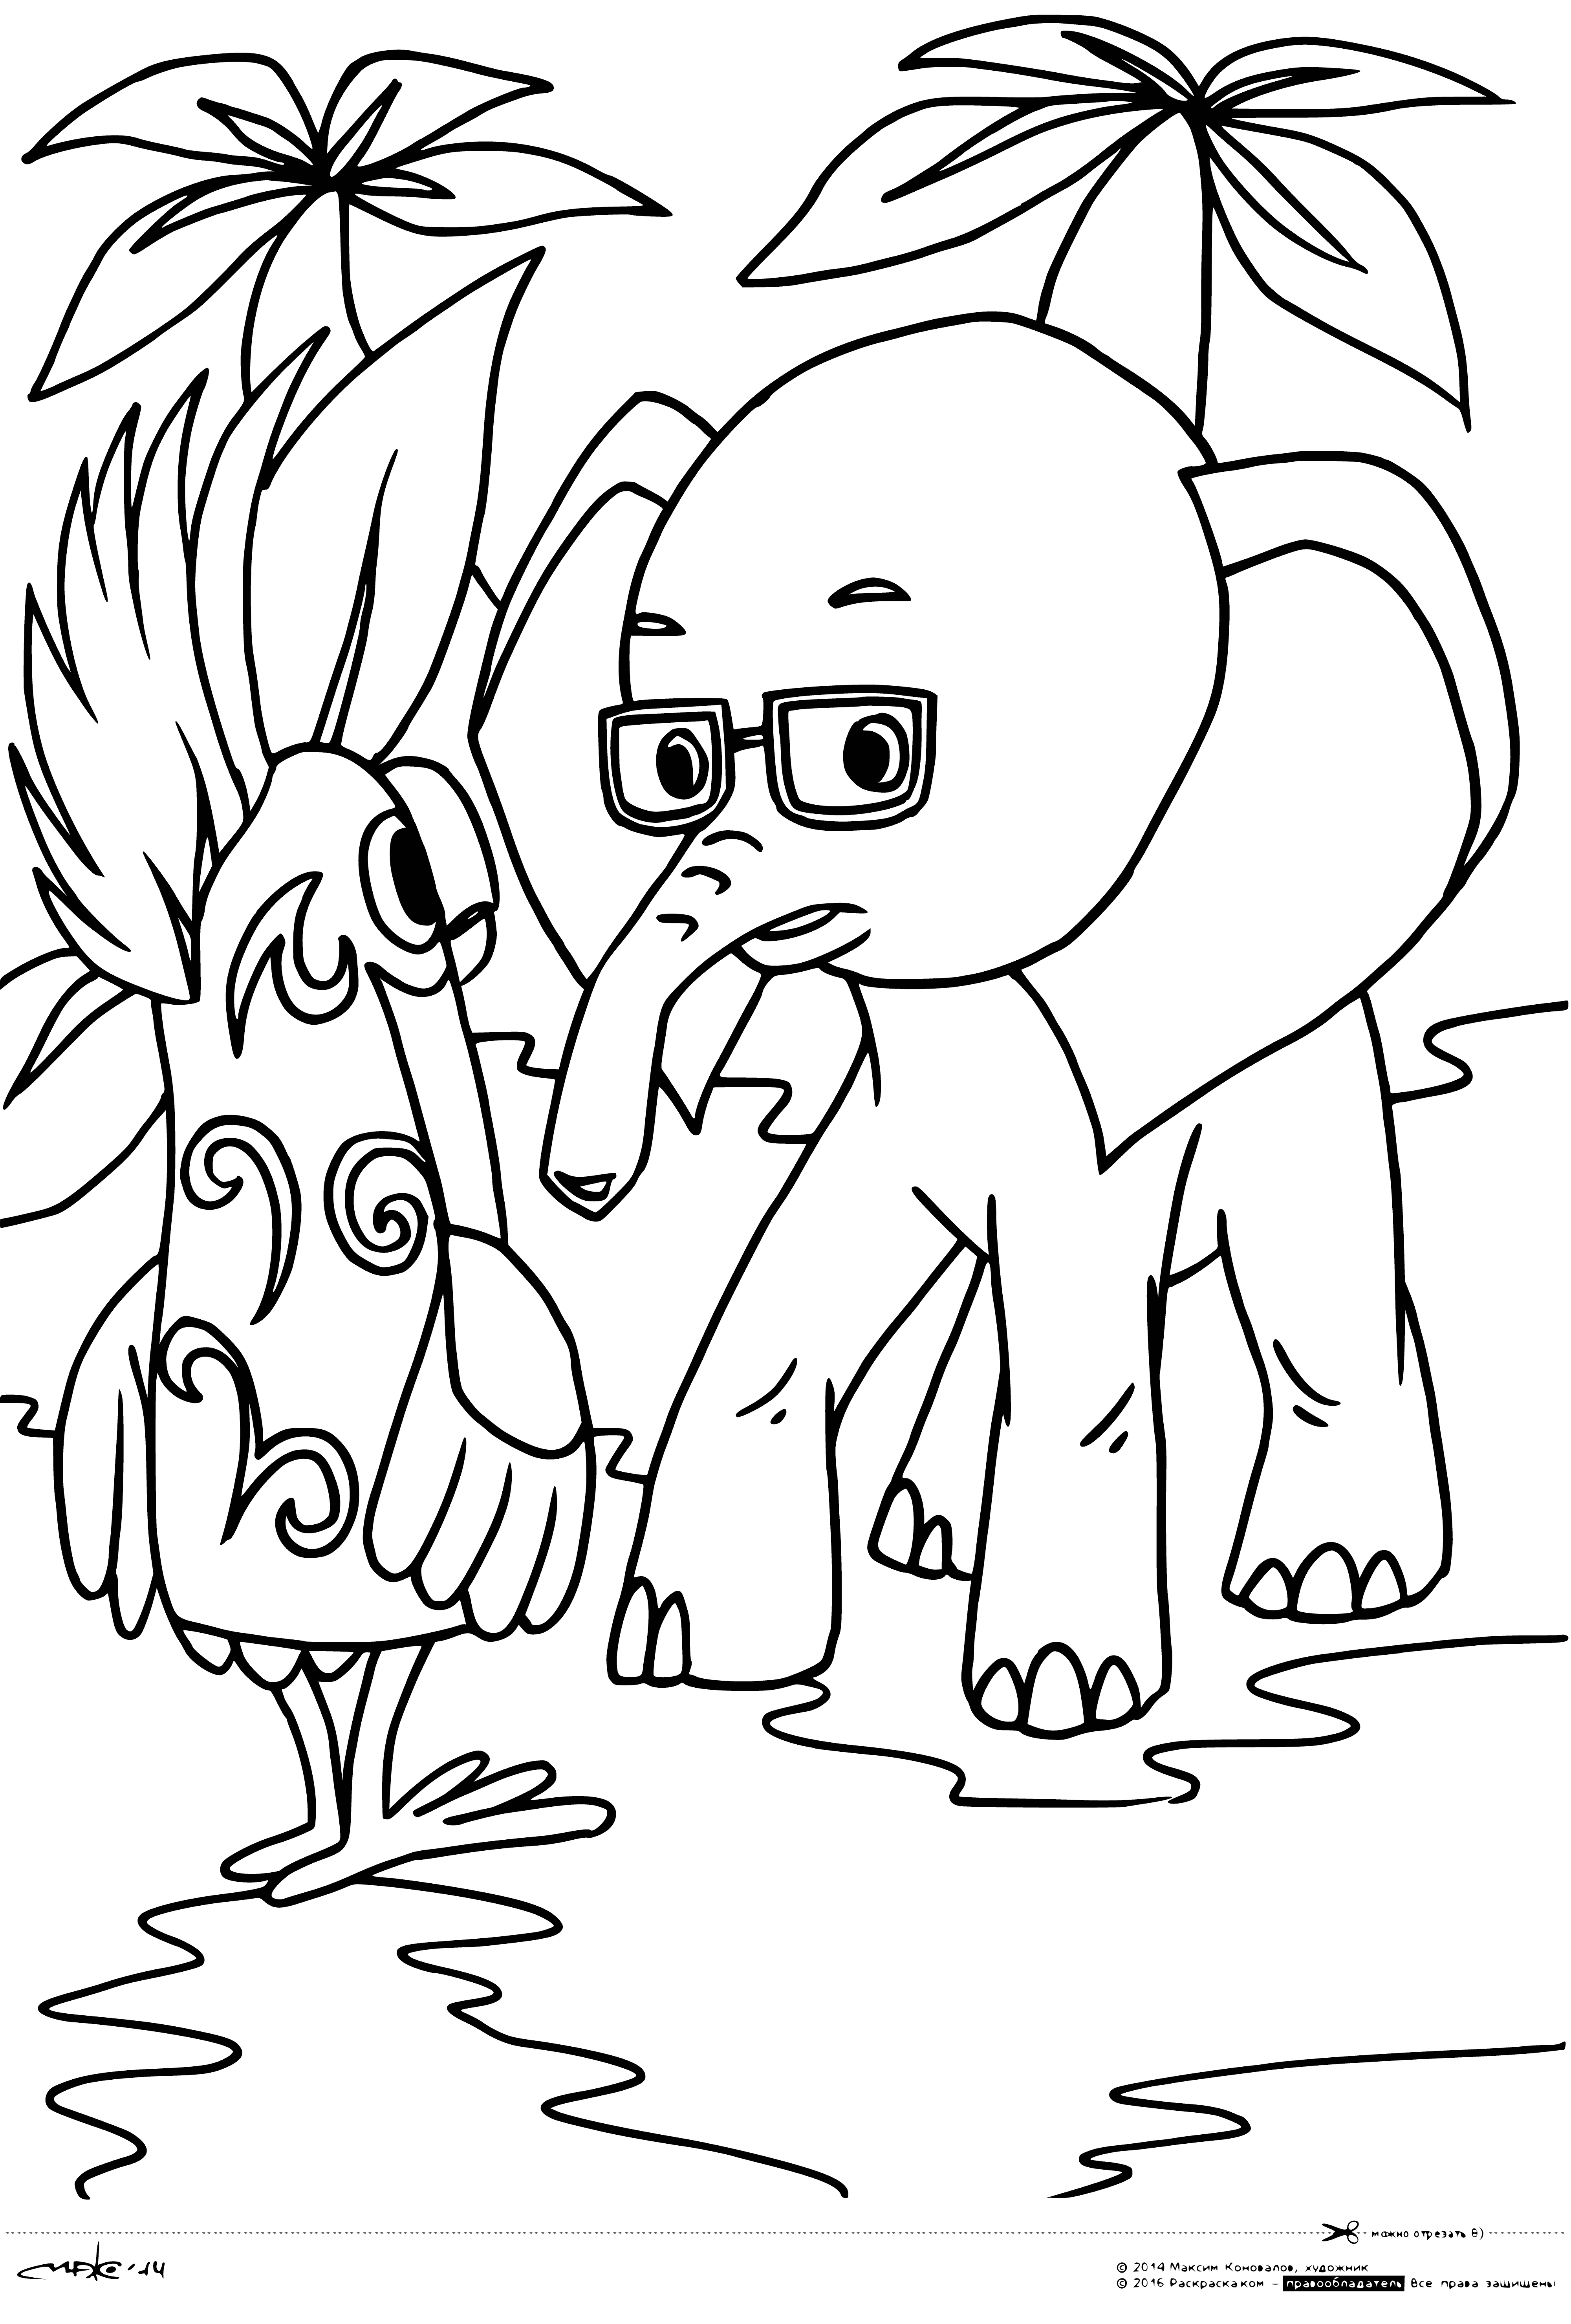 coloring page: An elephant and a parrot sit atop it, the latter brightly-colored and tweeting, while the former looks on with large eyes.